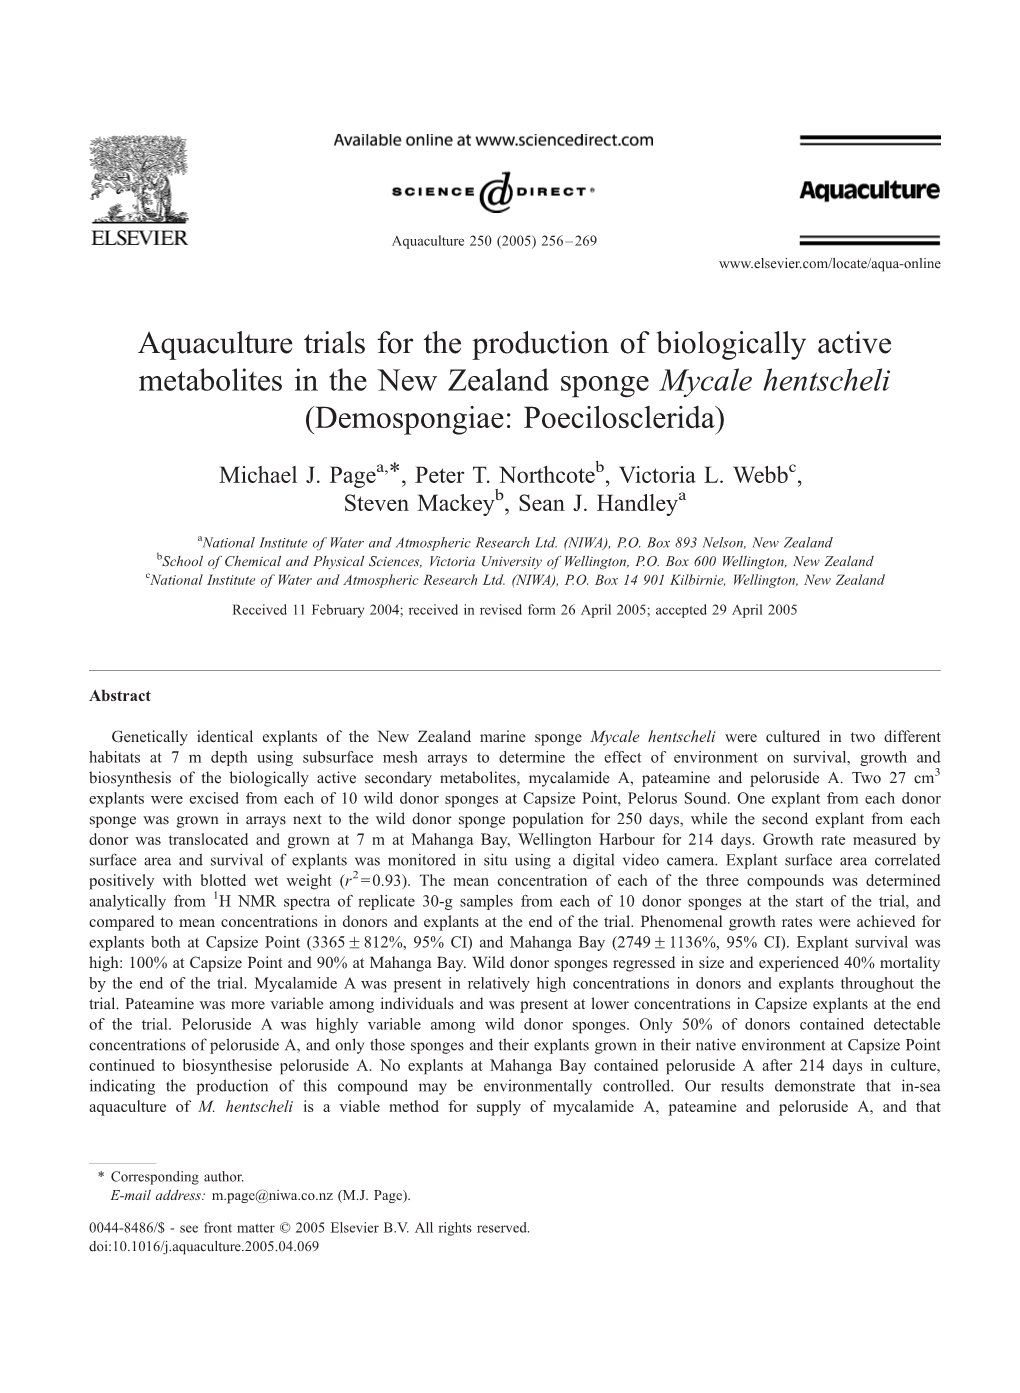 Aquaculture Trials for the Production of Biologically Active Metabolites in the New Zealand Sponge Mycale Hentscheli (Demospongiae: Poecilosclerida)